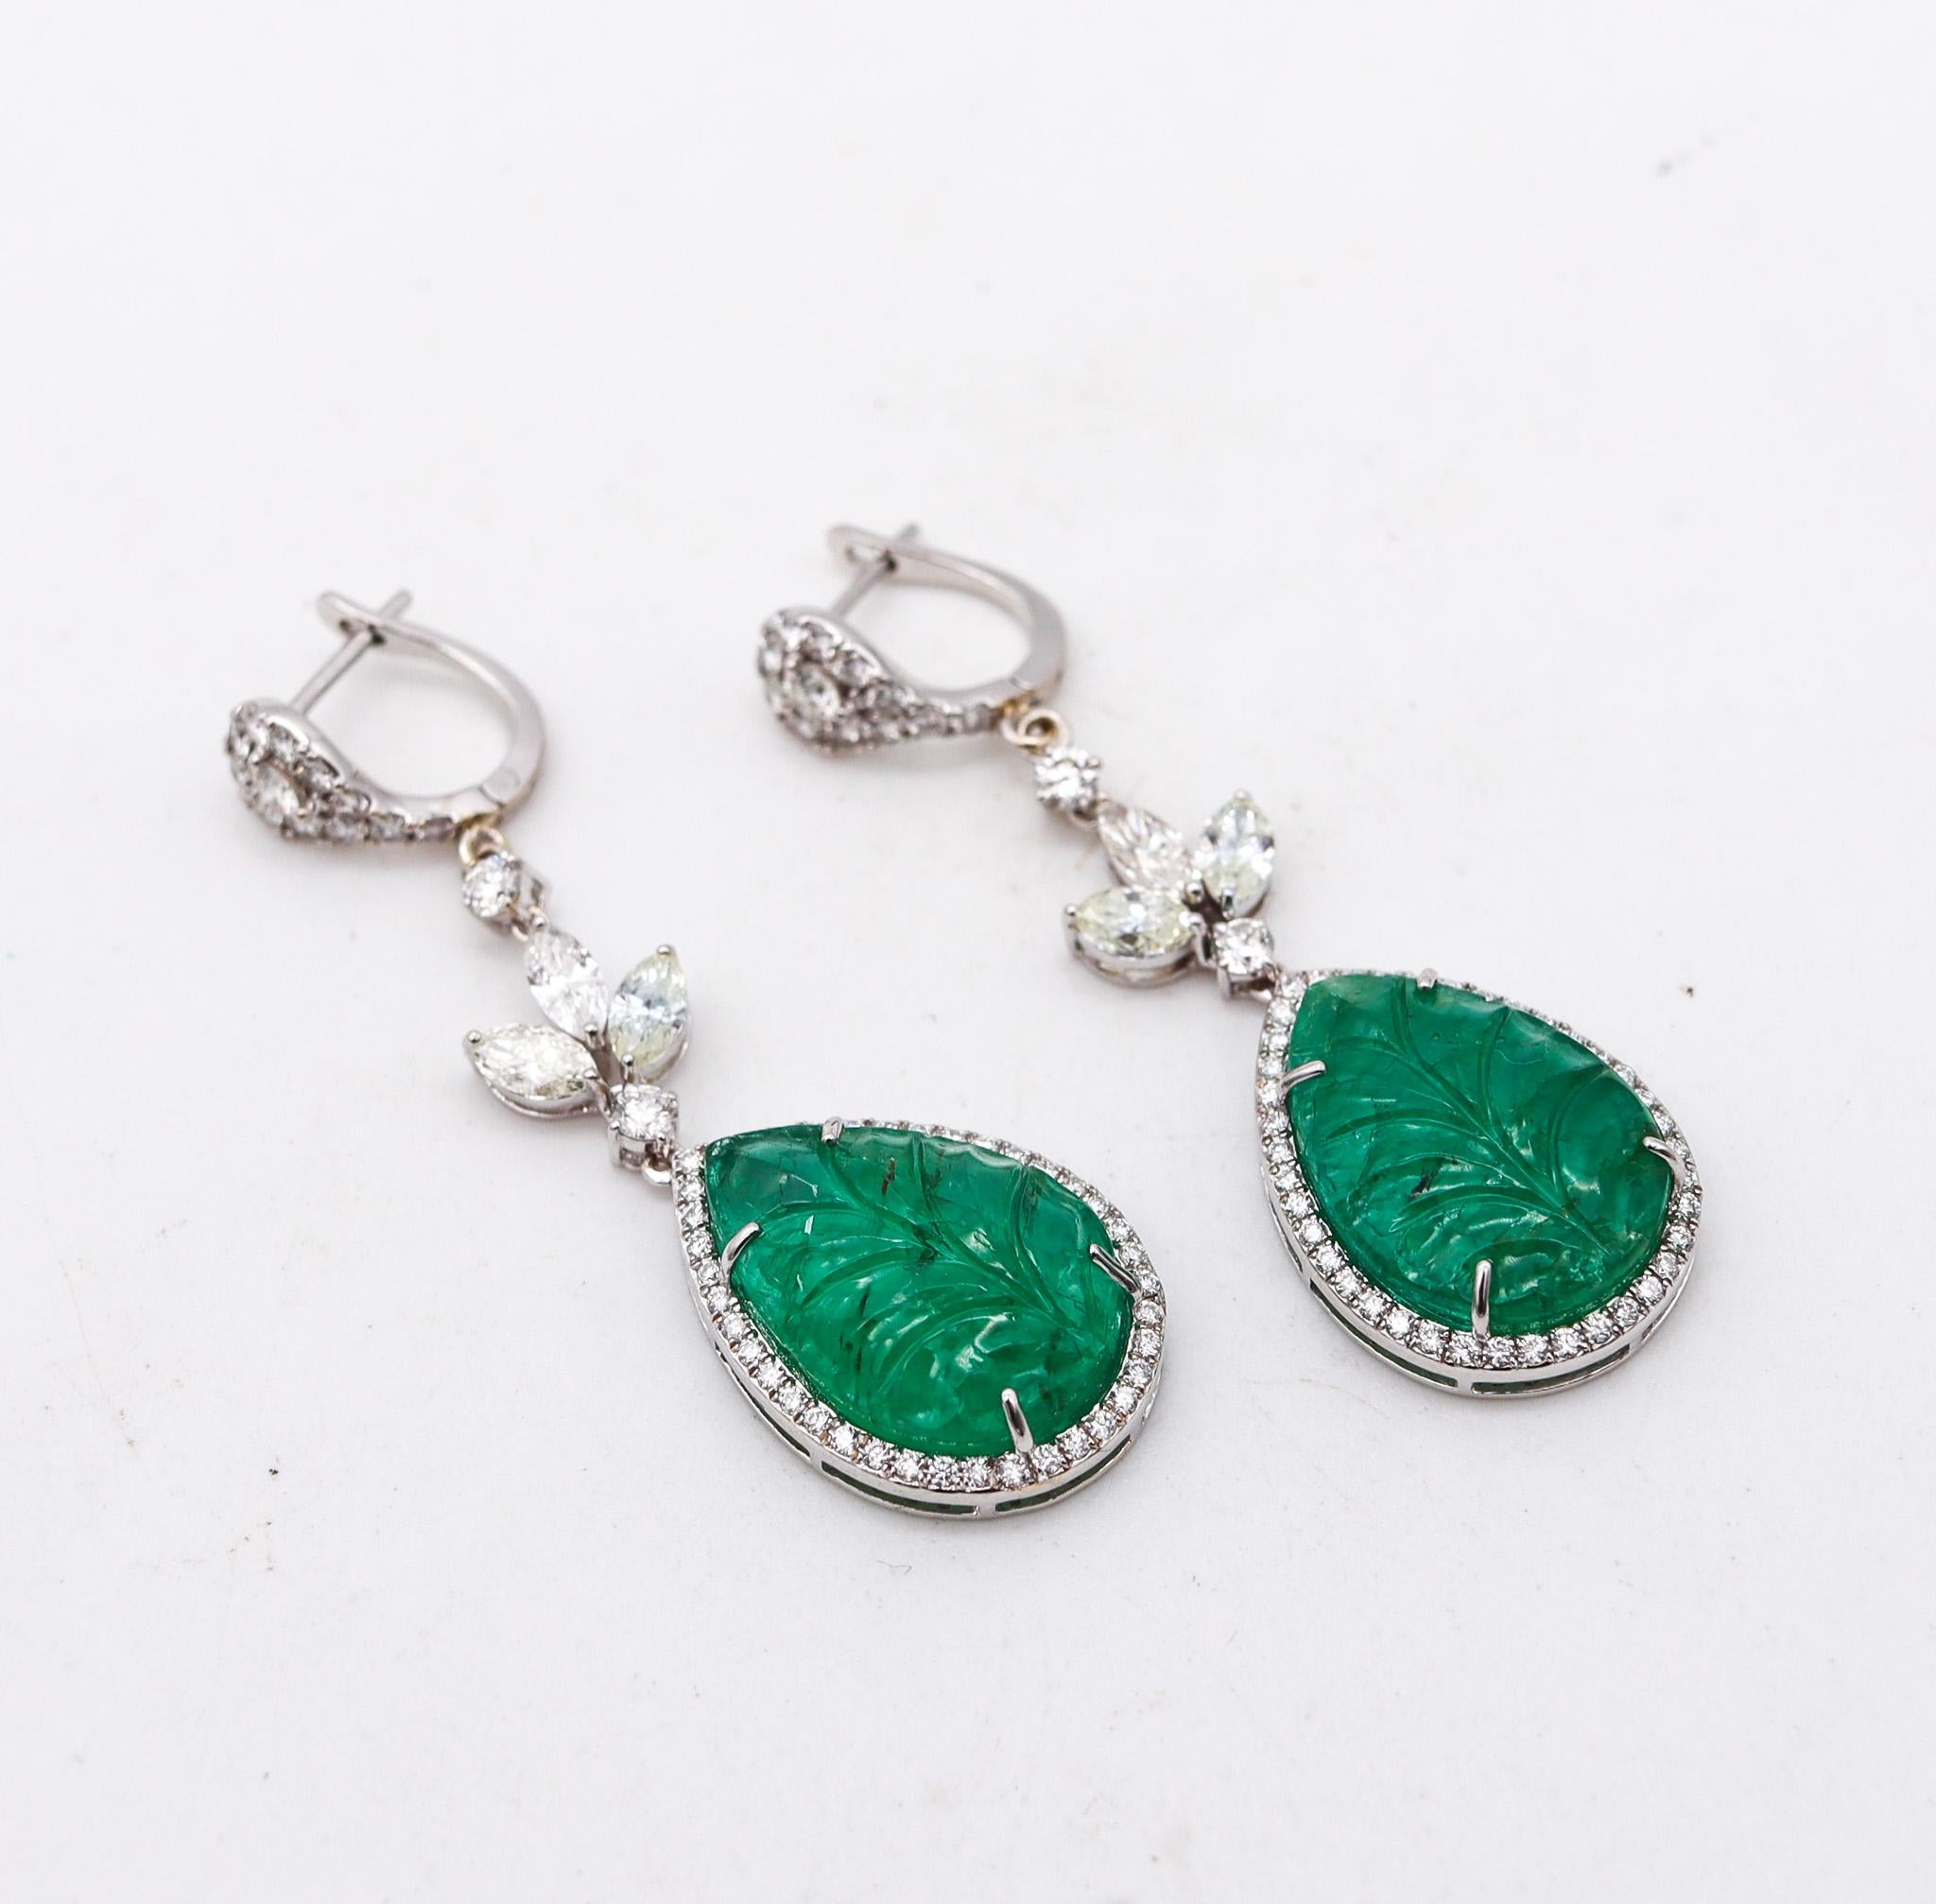 Modernist Dangle Drop Earrings In 18Kt Gold With 20.68 Ctw In Diamonds And Carved Emeralds For Sale